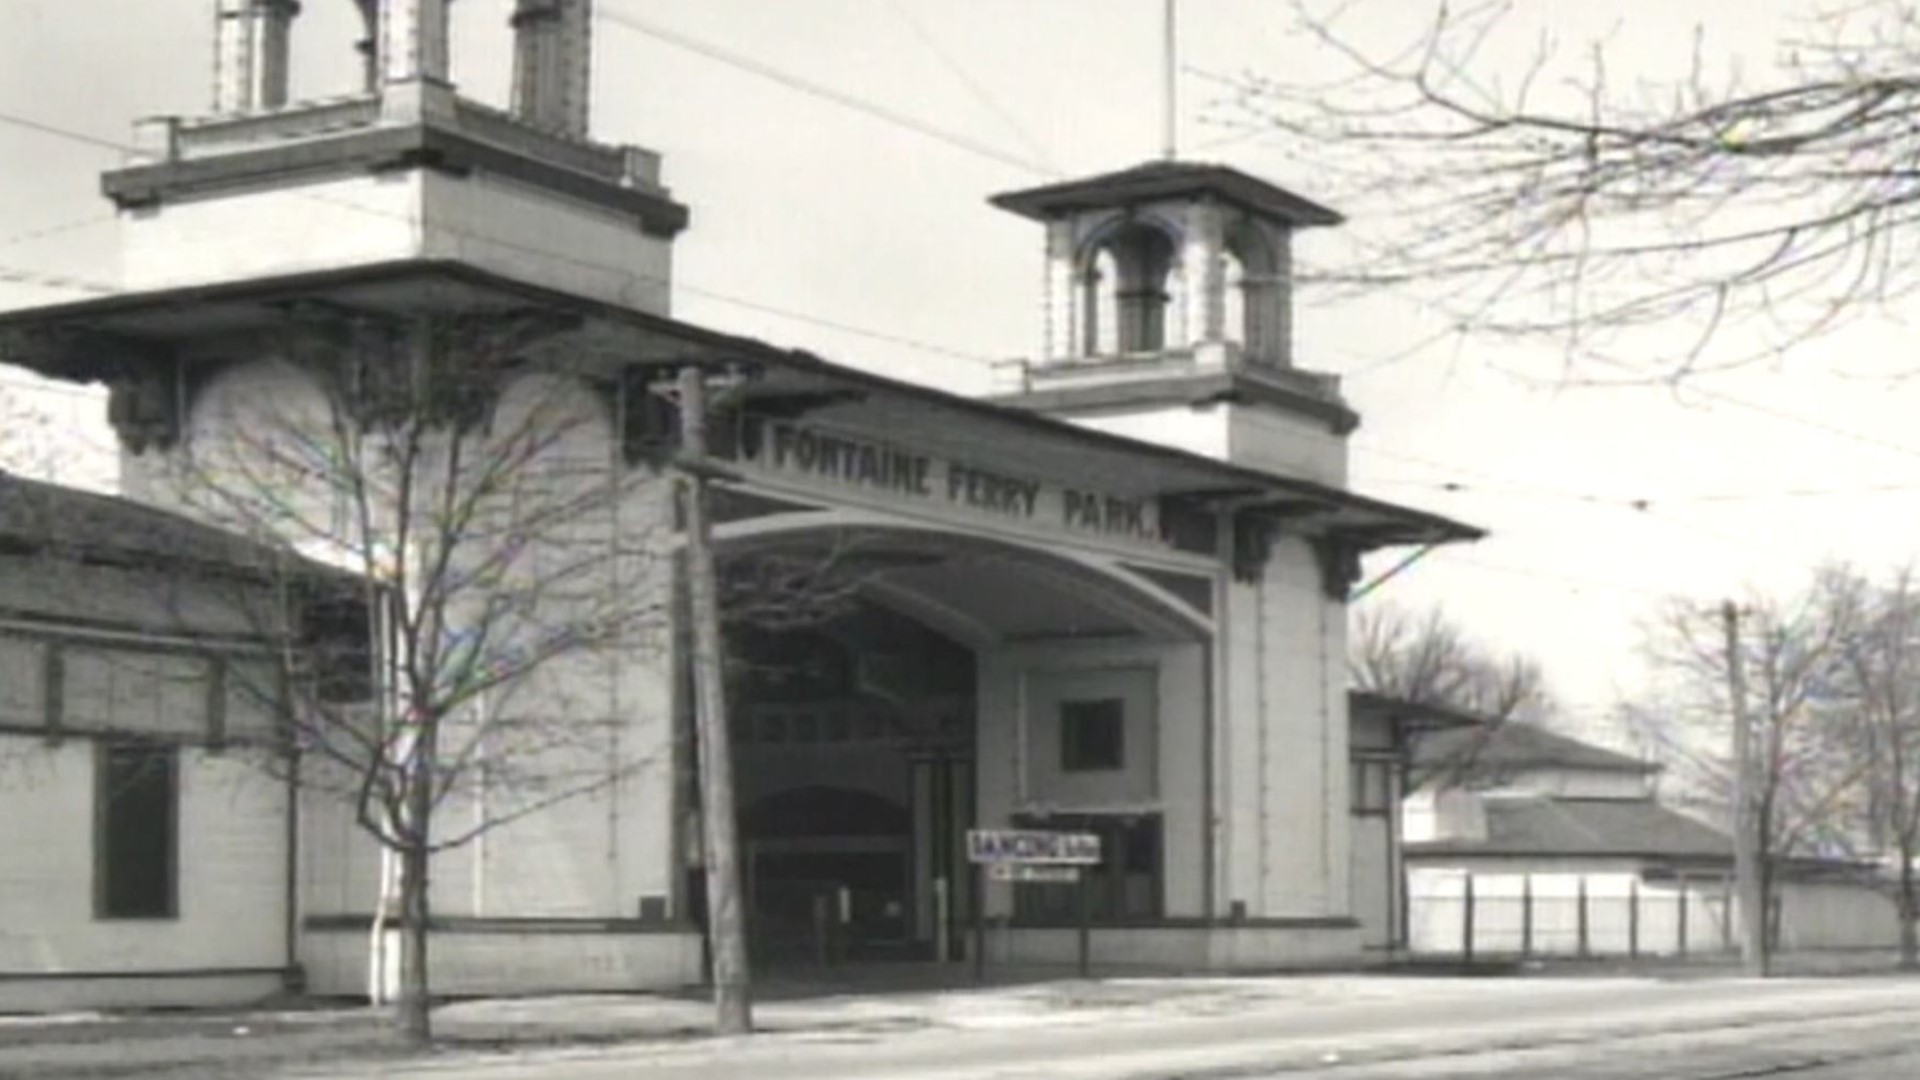 Fontaine Ferry Park sat on 64-acres of land in west Louisville on the Ohio River. It's complicated history was rooted in segregation and eventually closed in 1969.